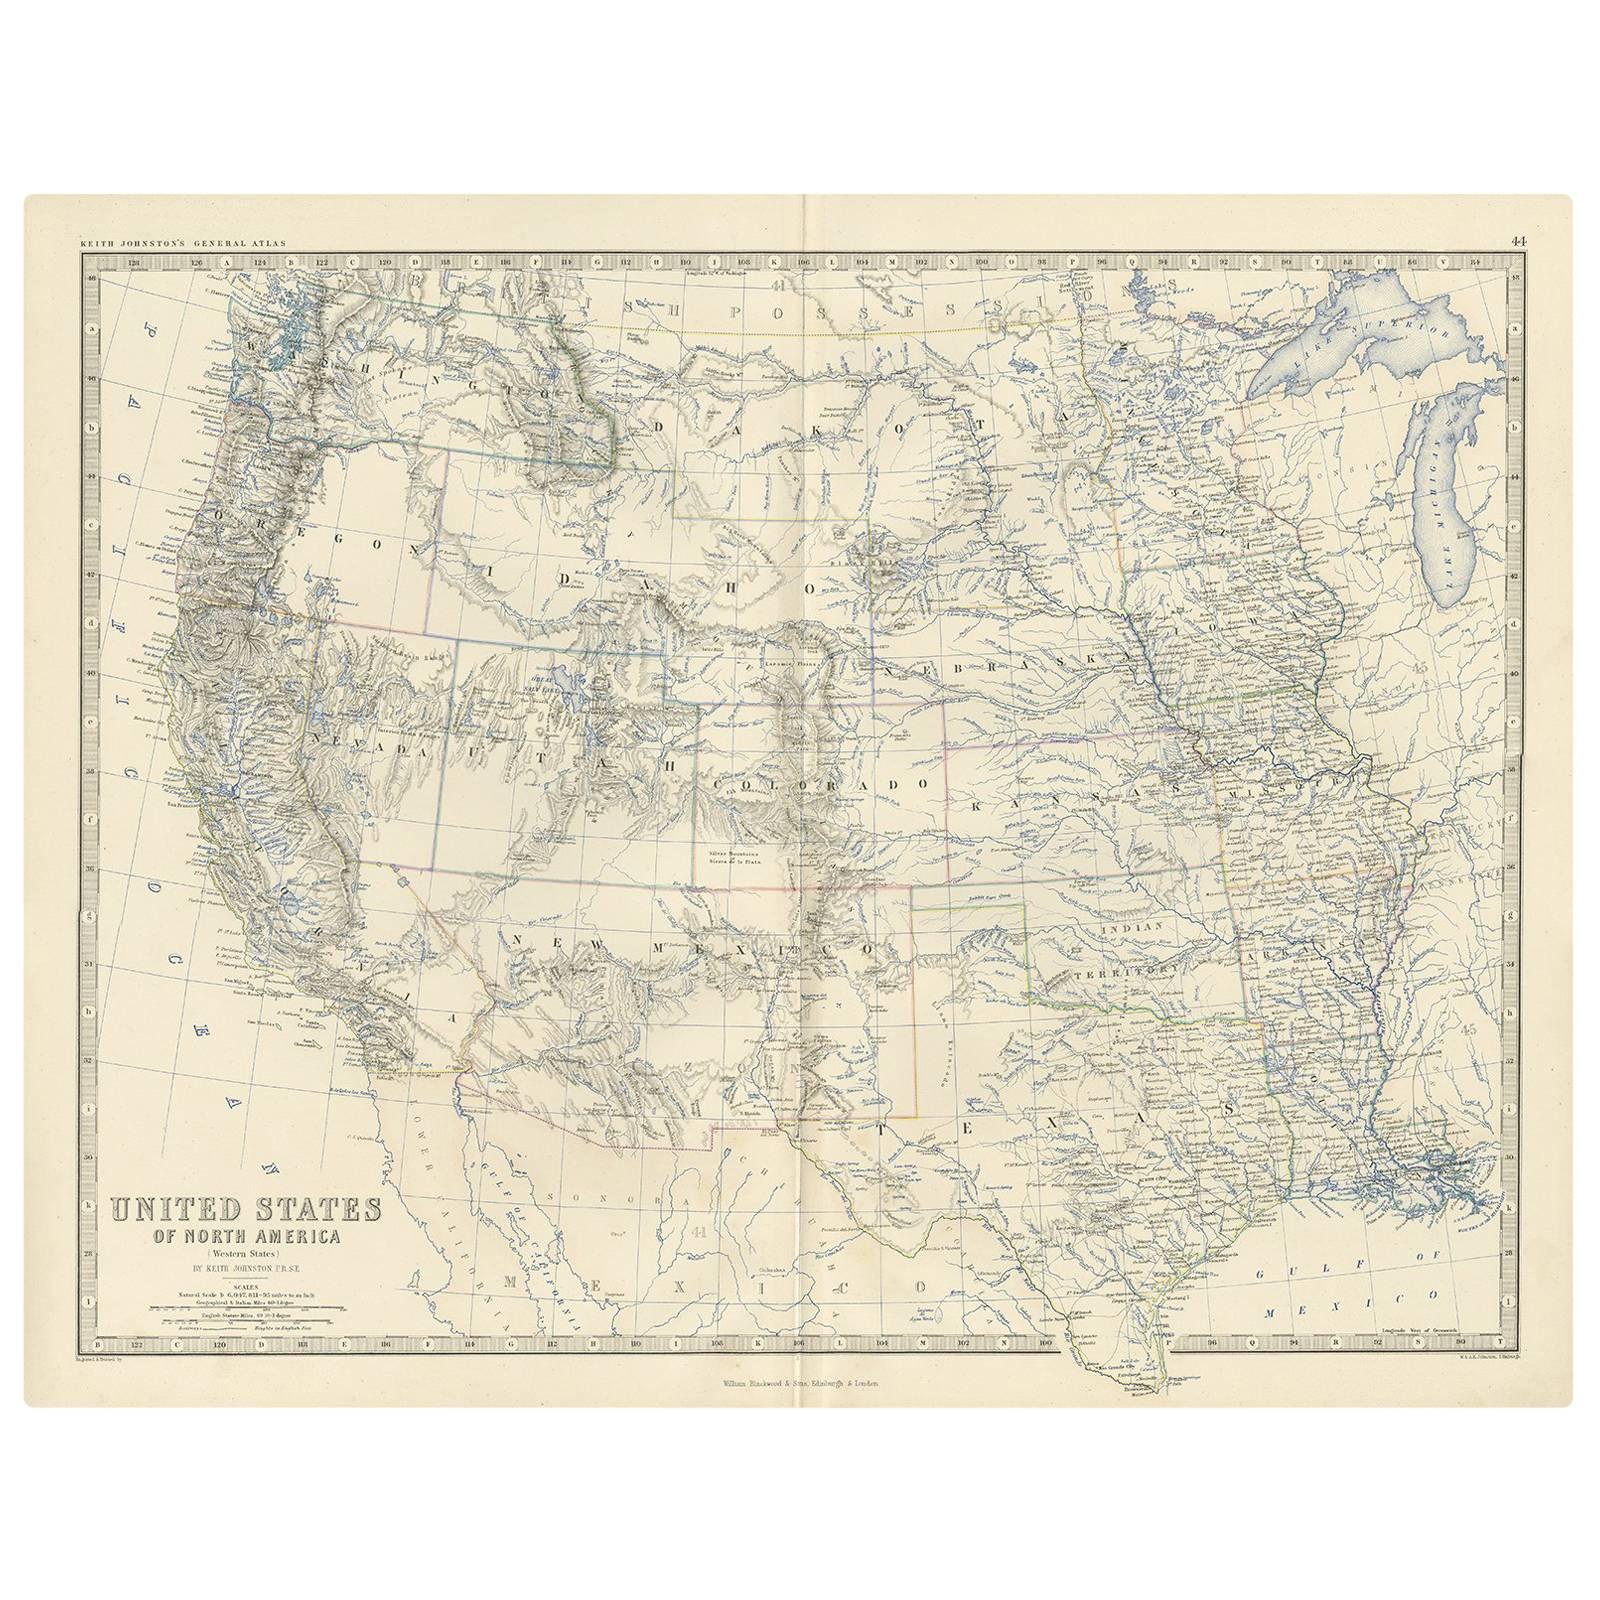 Antique Map of the United States of North America ‘West’ by A.K. Johnston, 1865